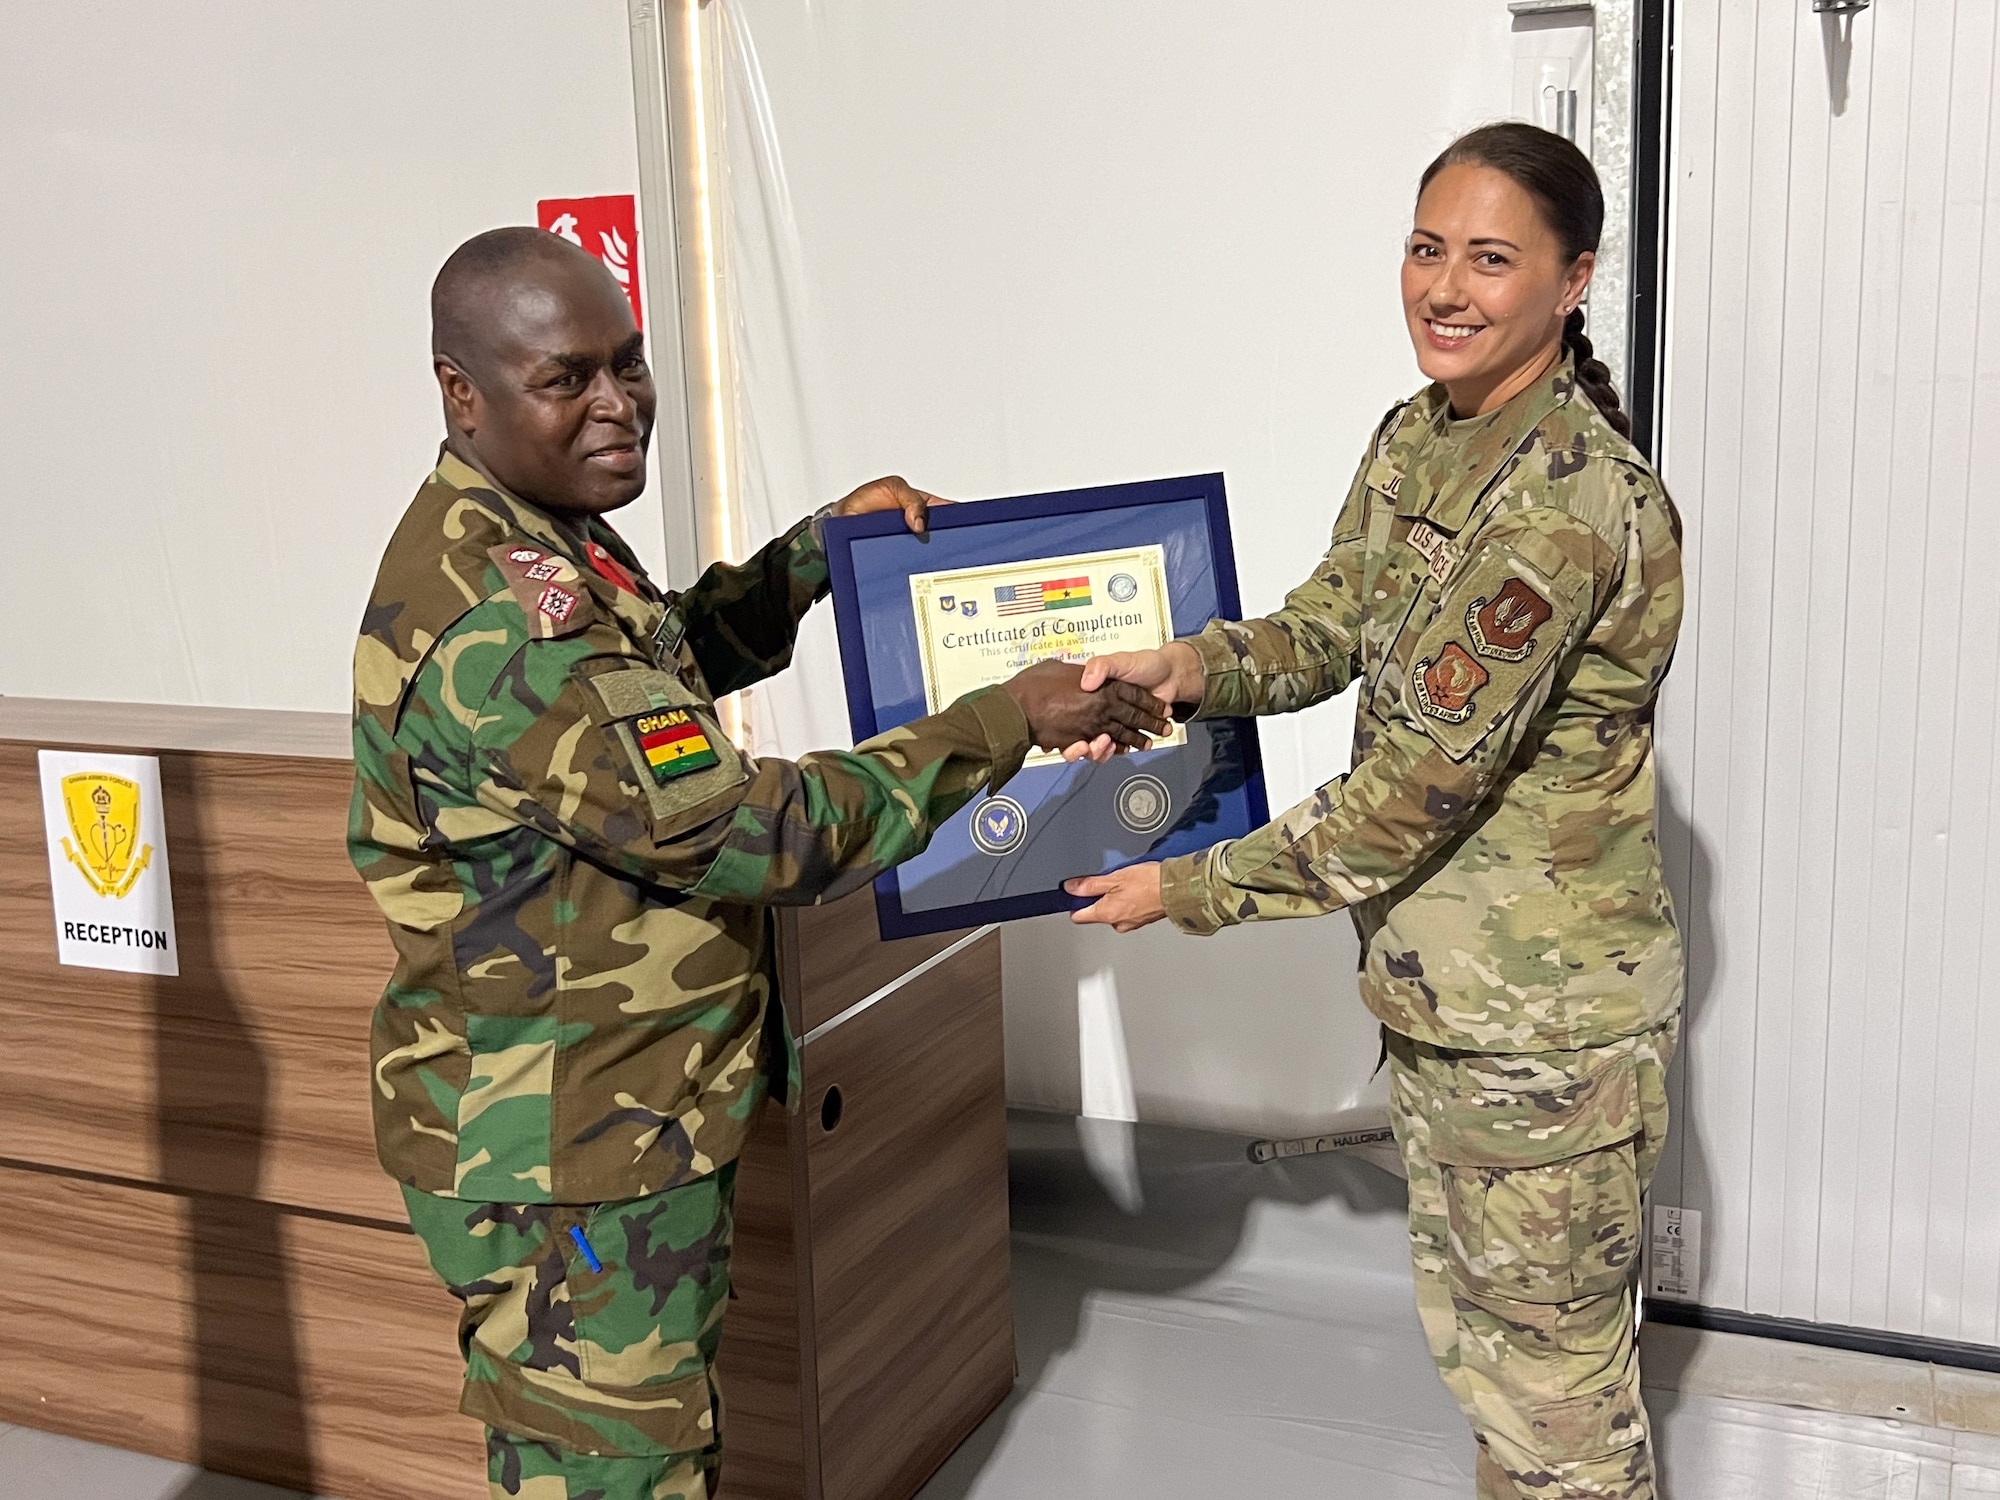 U.S. Air Force Lt. Col. Linda Jones, an international health specialist, presents a certificate to Ghana Armed Forces Col. George Boamah, GAF director of medical training, to mark the completion of a train-the-trainer event in Accra, Ghana, in early May. The training was part of the GAF’s pursuit of United Nations validation of its Aeromedical Evacuation Team capabilities. (Courtesy photo)